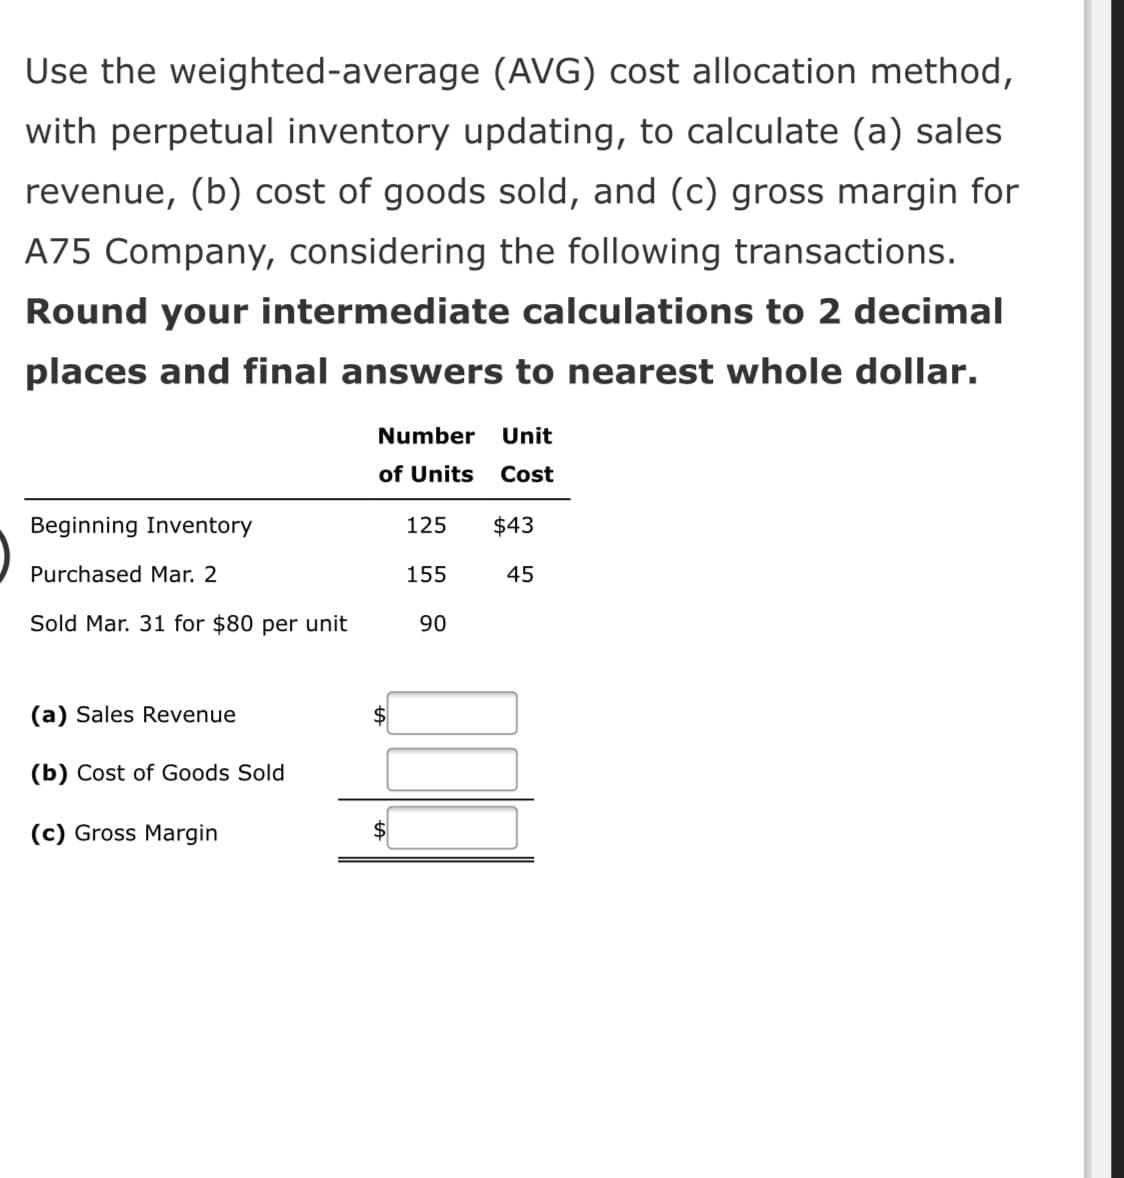 Use the weighted-average (AVG) cost allocation method,
with perpetual inventory updating, to calculate (a) sales
revenue, (b) cost of goods sold, and (c) gross margin for
A75 Company, considering the following transactions.
Round your intermediate calculations to 2 decimal
places and final answers to nearest whole dollar.
Number
Unit
of Units
Cost
Beginning Inventory
125
$43
Purchased Mar. 2
155
45
Sold Mar. 31 for $80 per unit
90
(a) Sales Revenue
$
(b) Cost of Goods Sold
(c) Gross Margin
$
